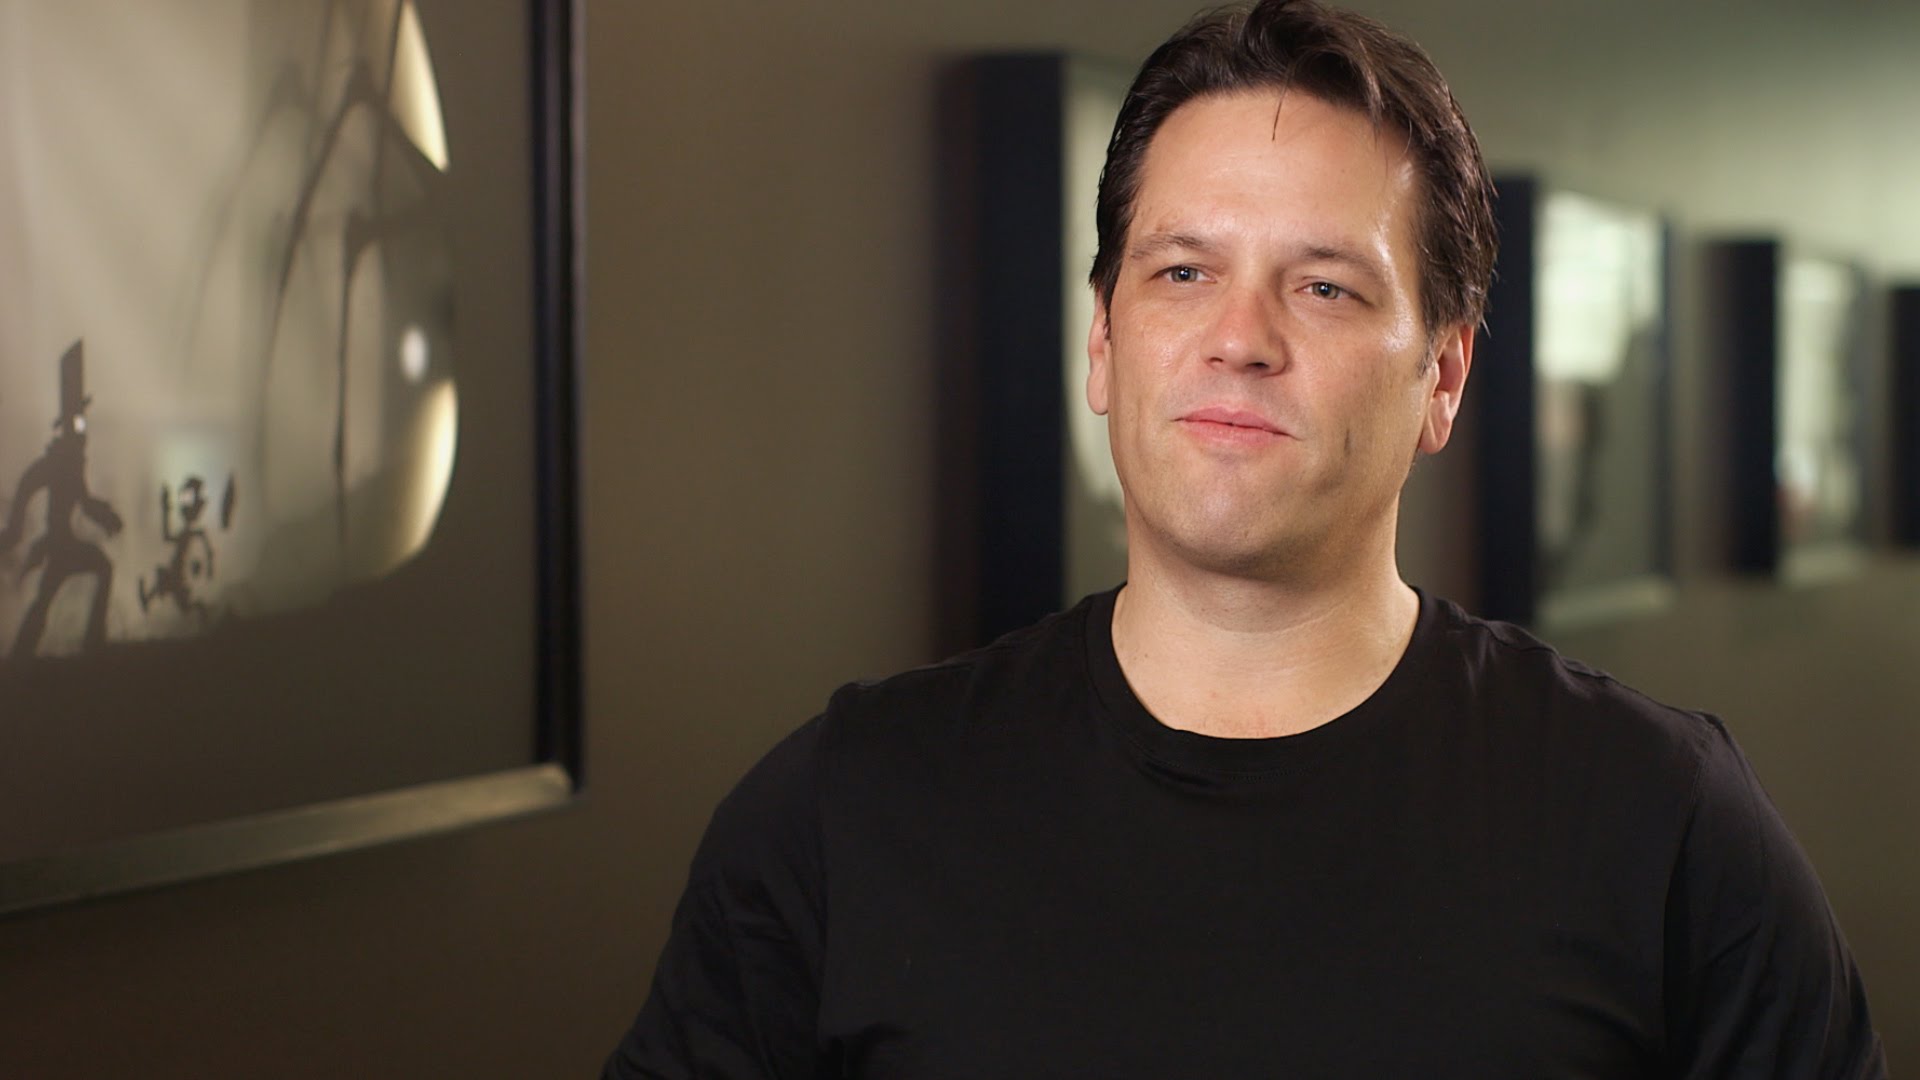 Phil Spencer explains why Activision Blizzard games won't join